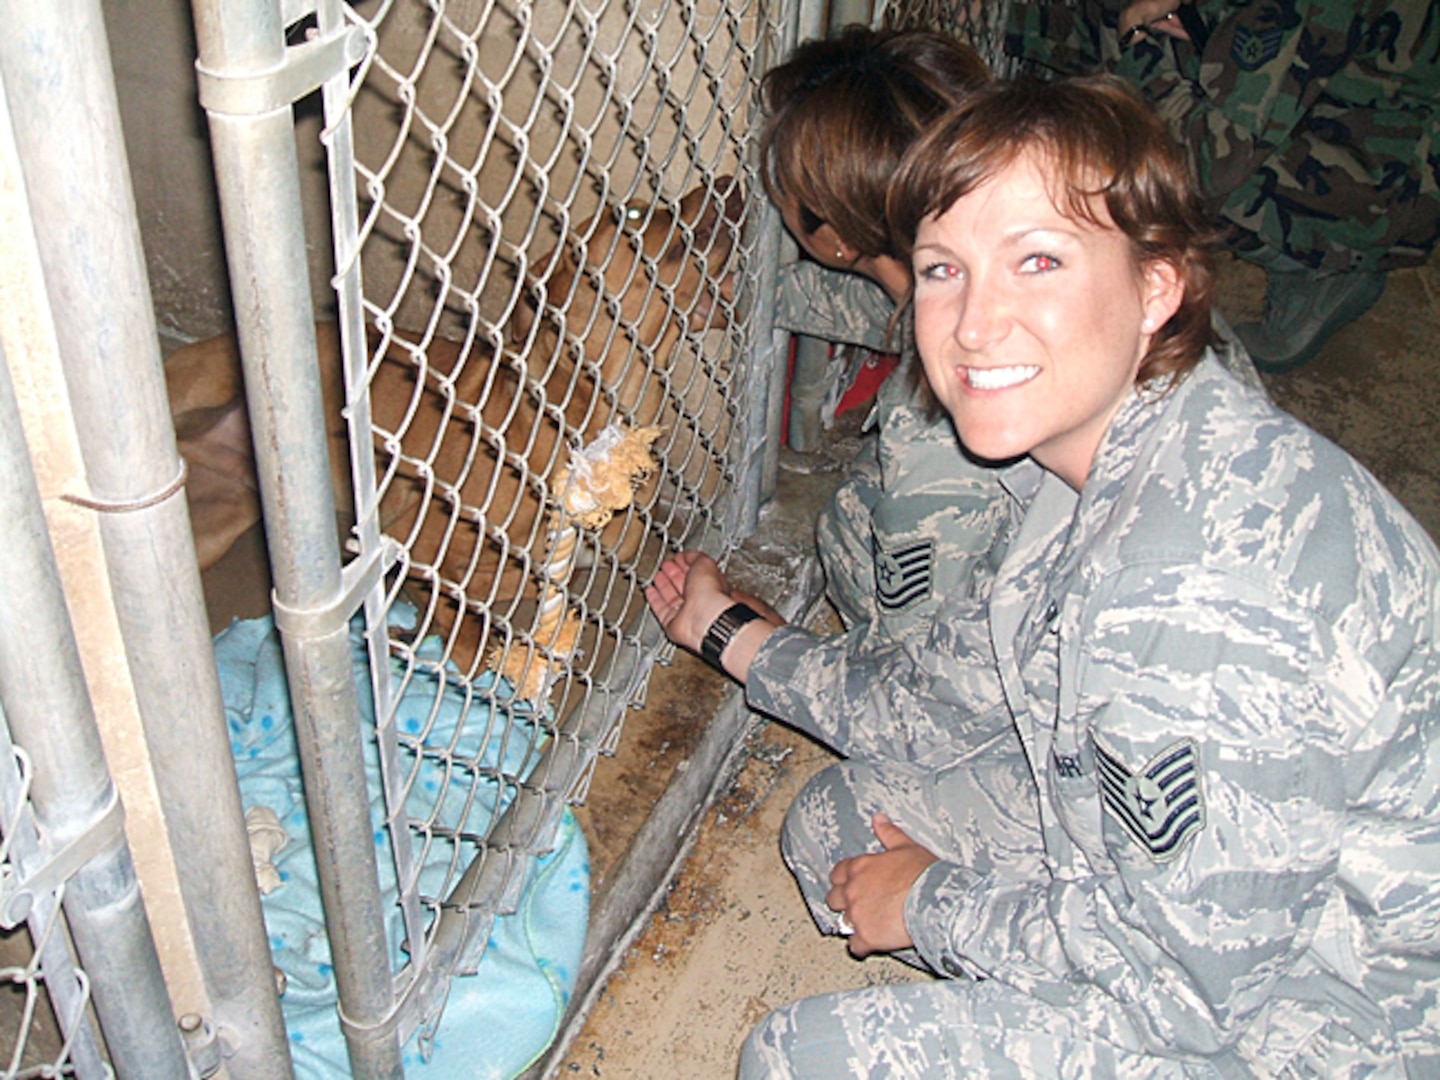 Tech. Sgts. Sandra Deason (right) and Sara Montes visit with an animal at the Universal City Animal Shelter after delivering pet supplies donated by members of the Air Force Personnel Center. (Courtesy photo)